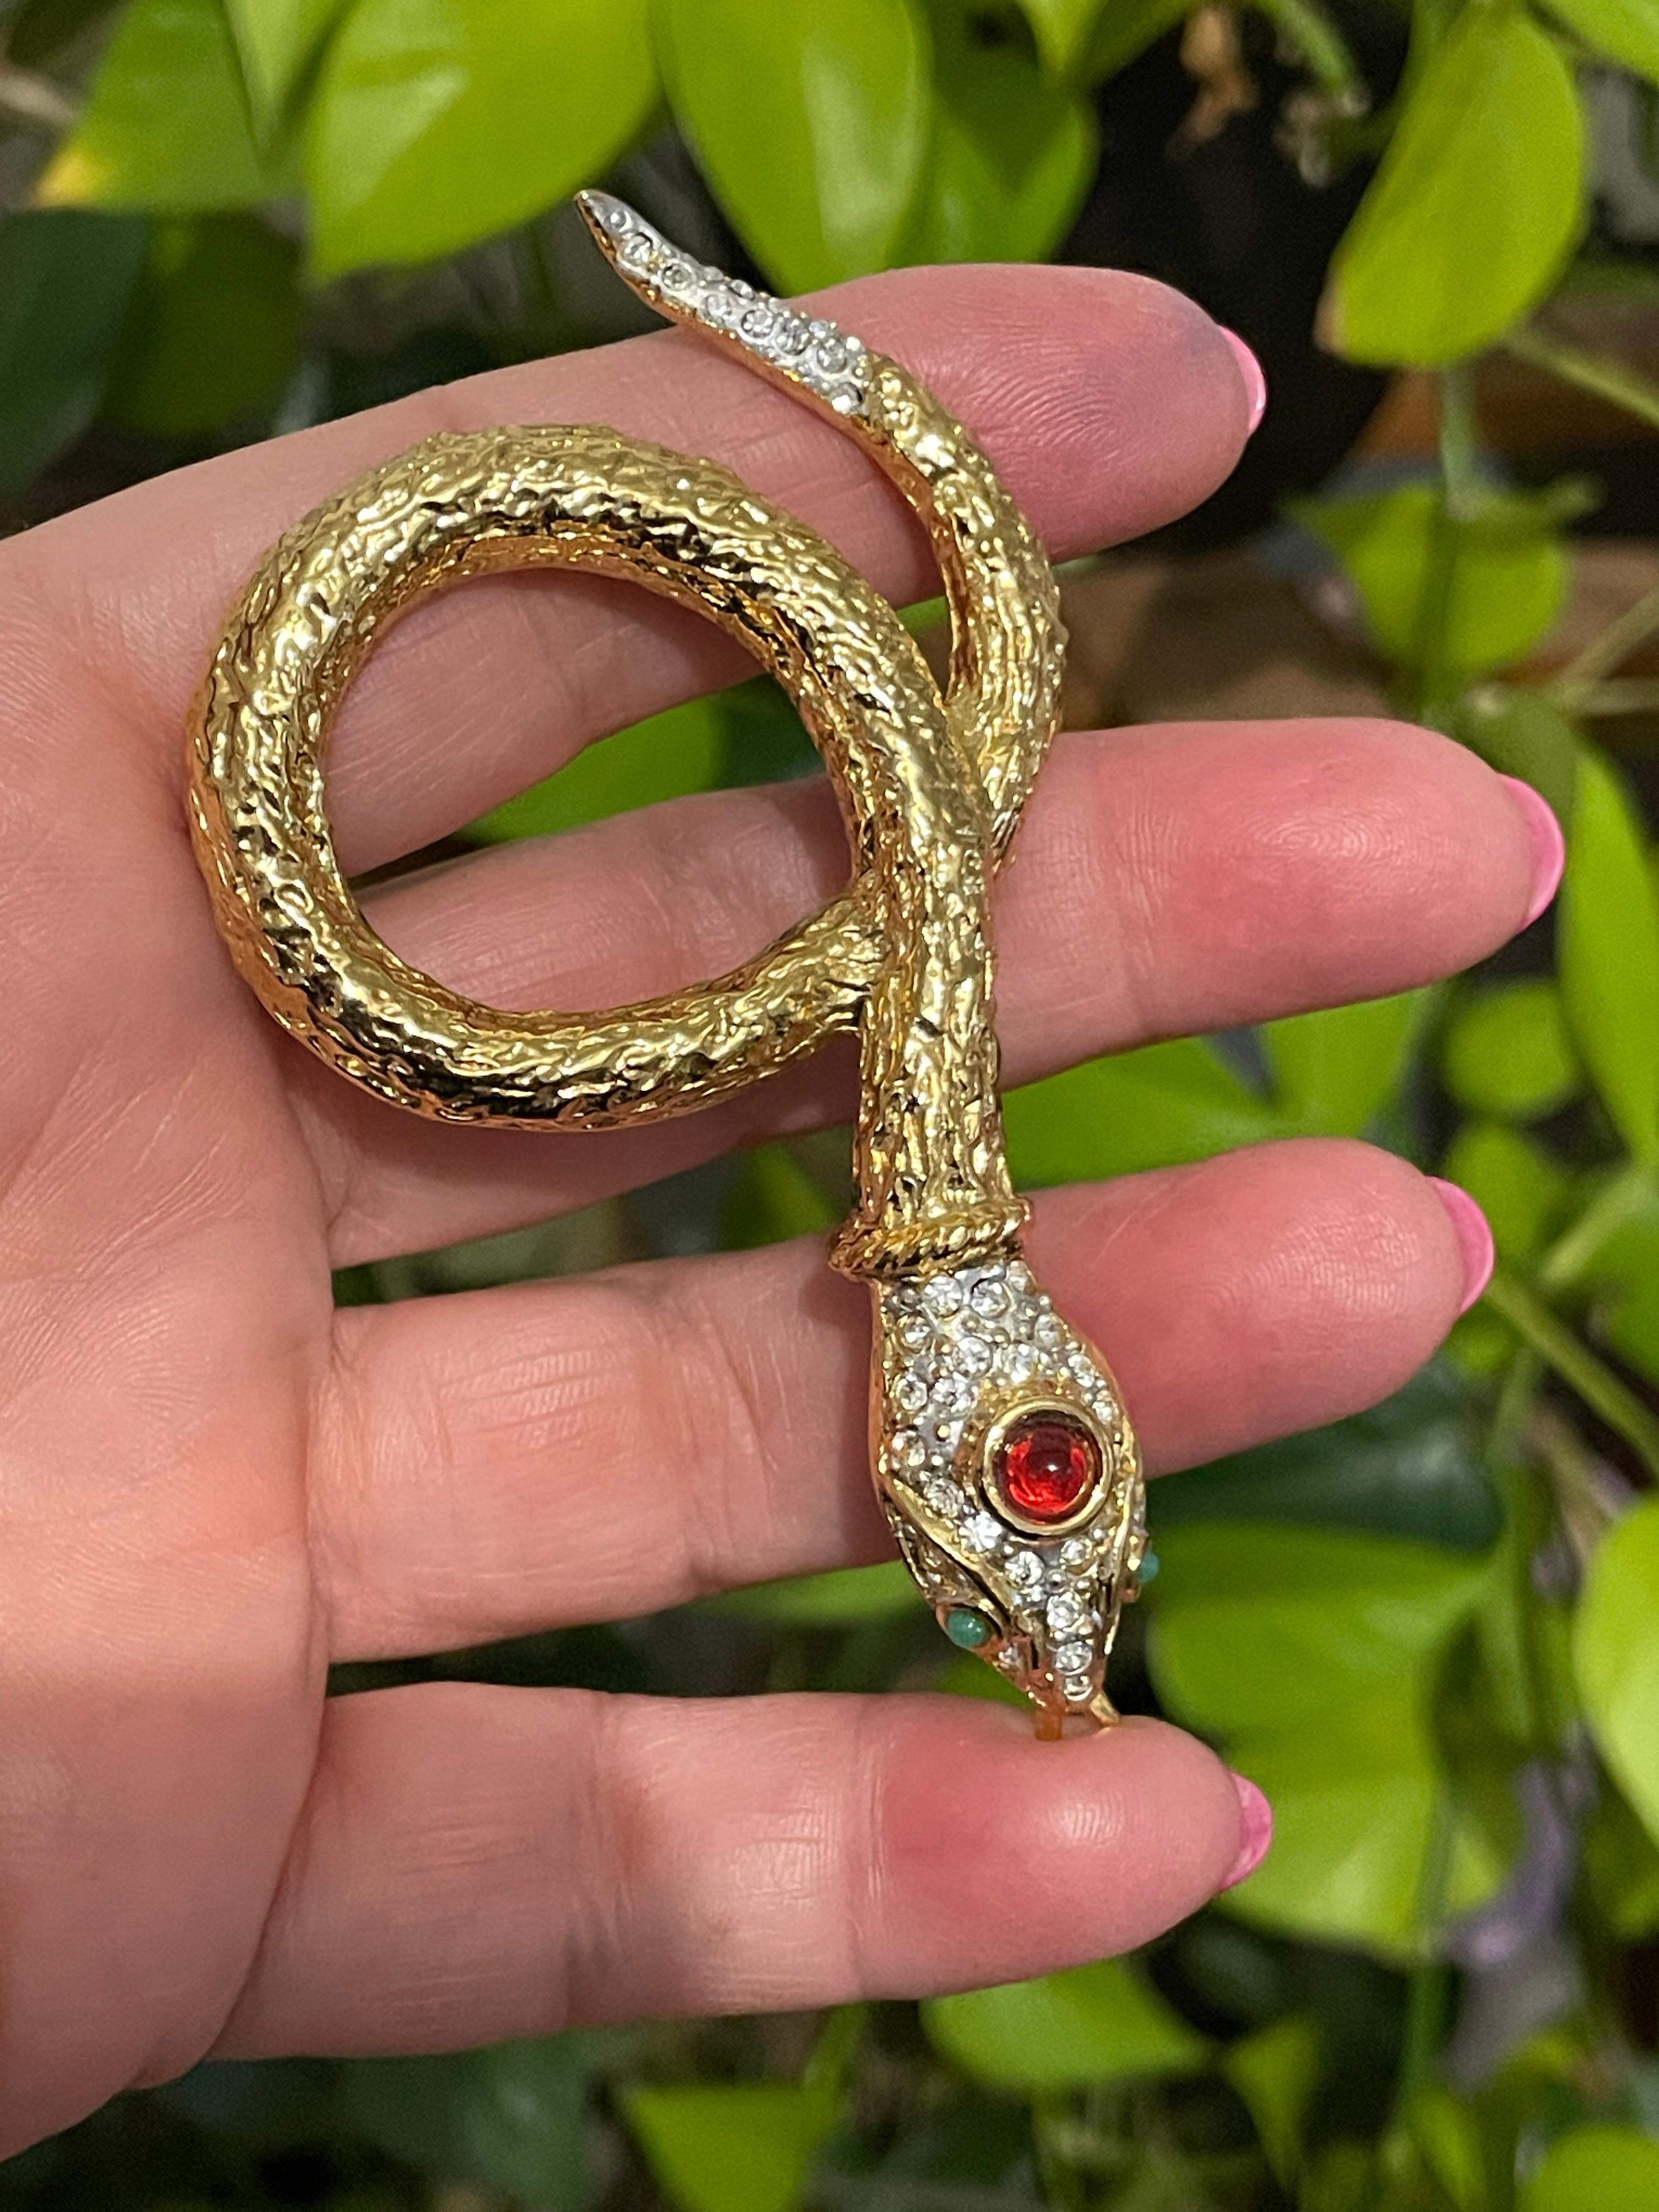 Crystals set in the snake head and its tail Green Cab eyes with a Reddish Cab on the top of the head' The snake is Wrapped up around itself. Very Cool Statement piece. Measures 3.46 inches x 1.90 inches top to bottom...Visit our store front for